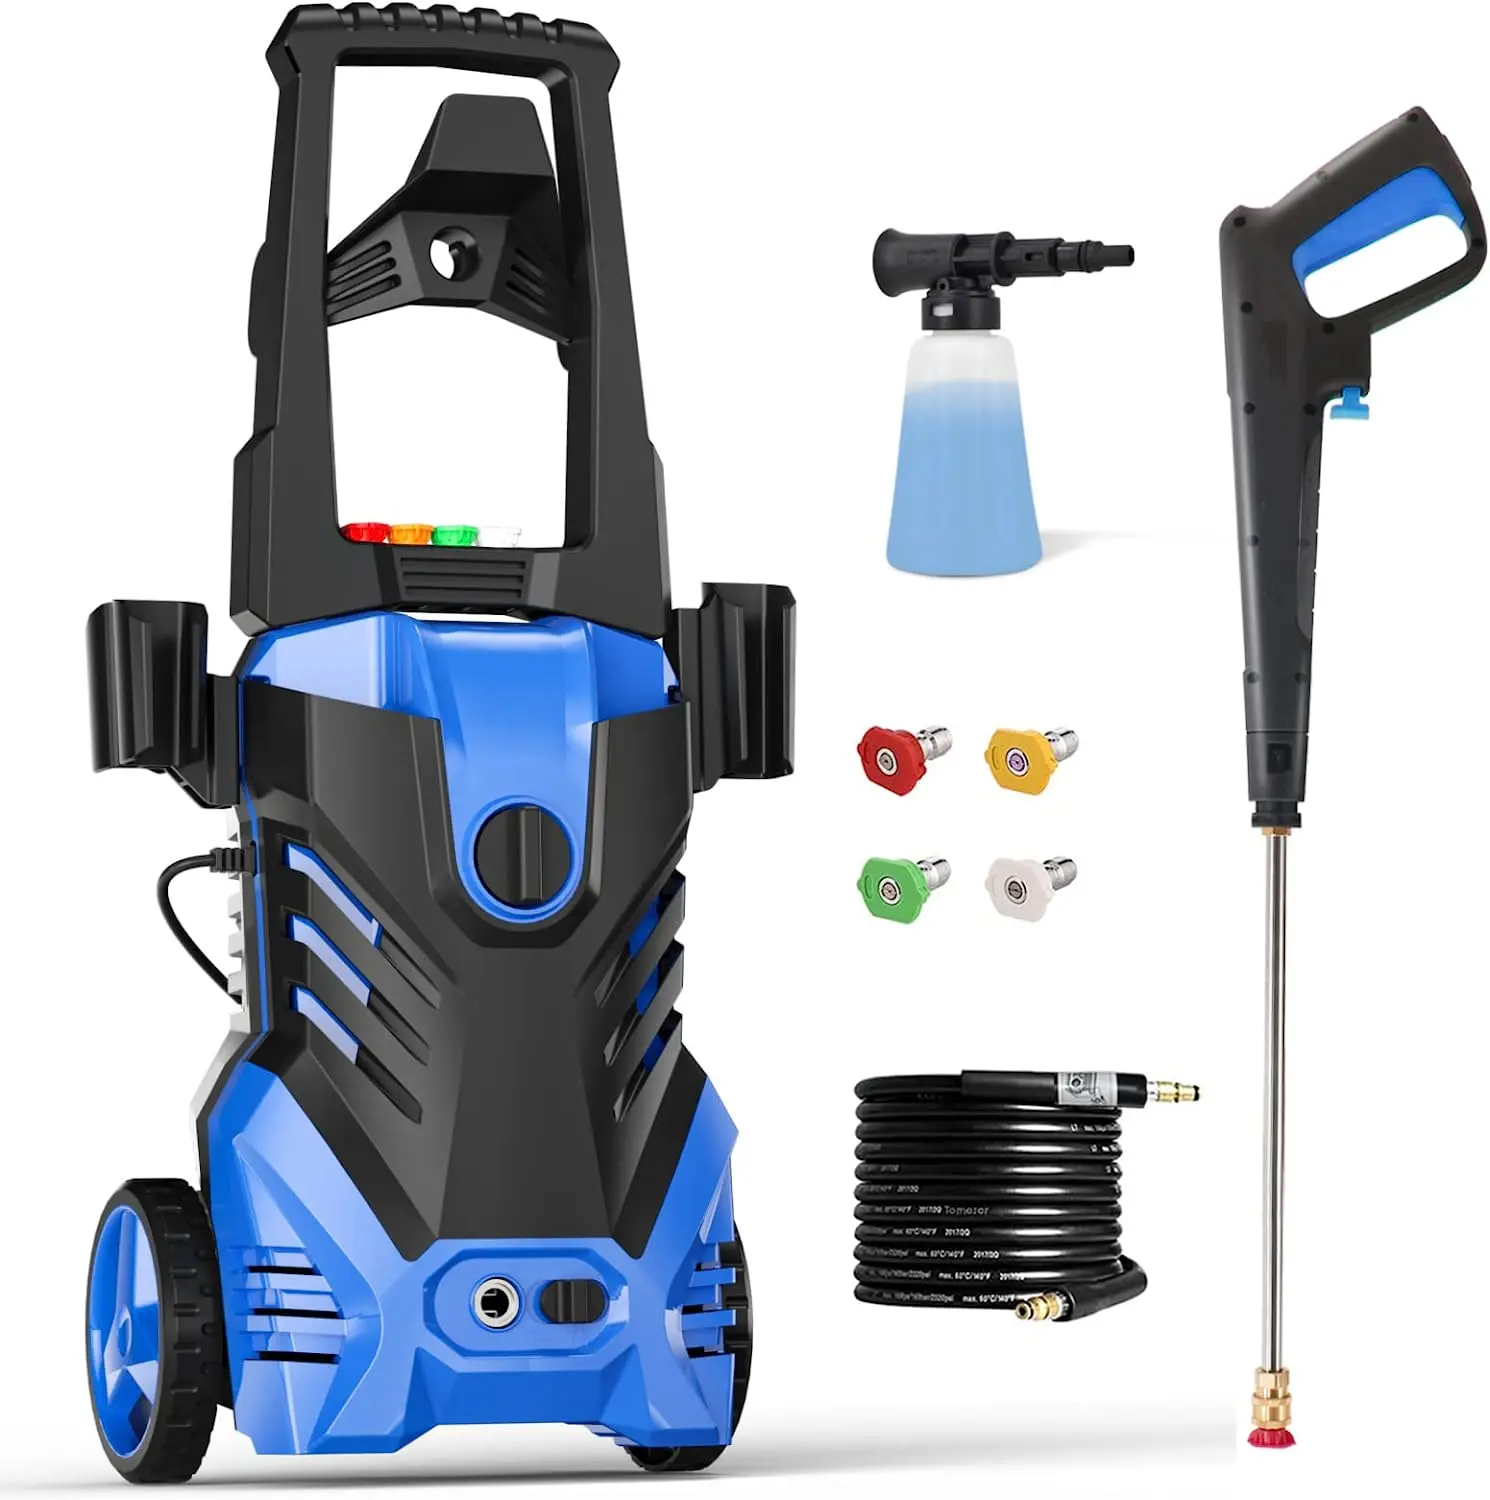 EVEAGE Powerful Electric Pressure Washer – 3500 PSI 2.5 GPM Electric Power Washer